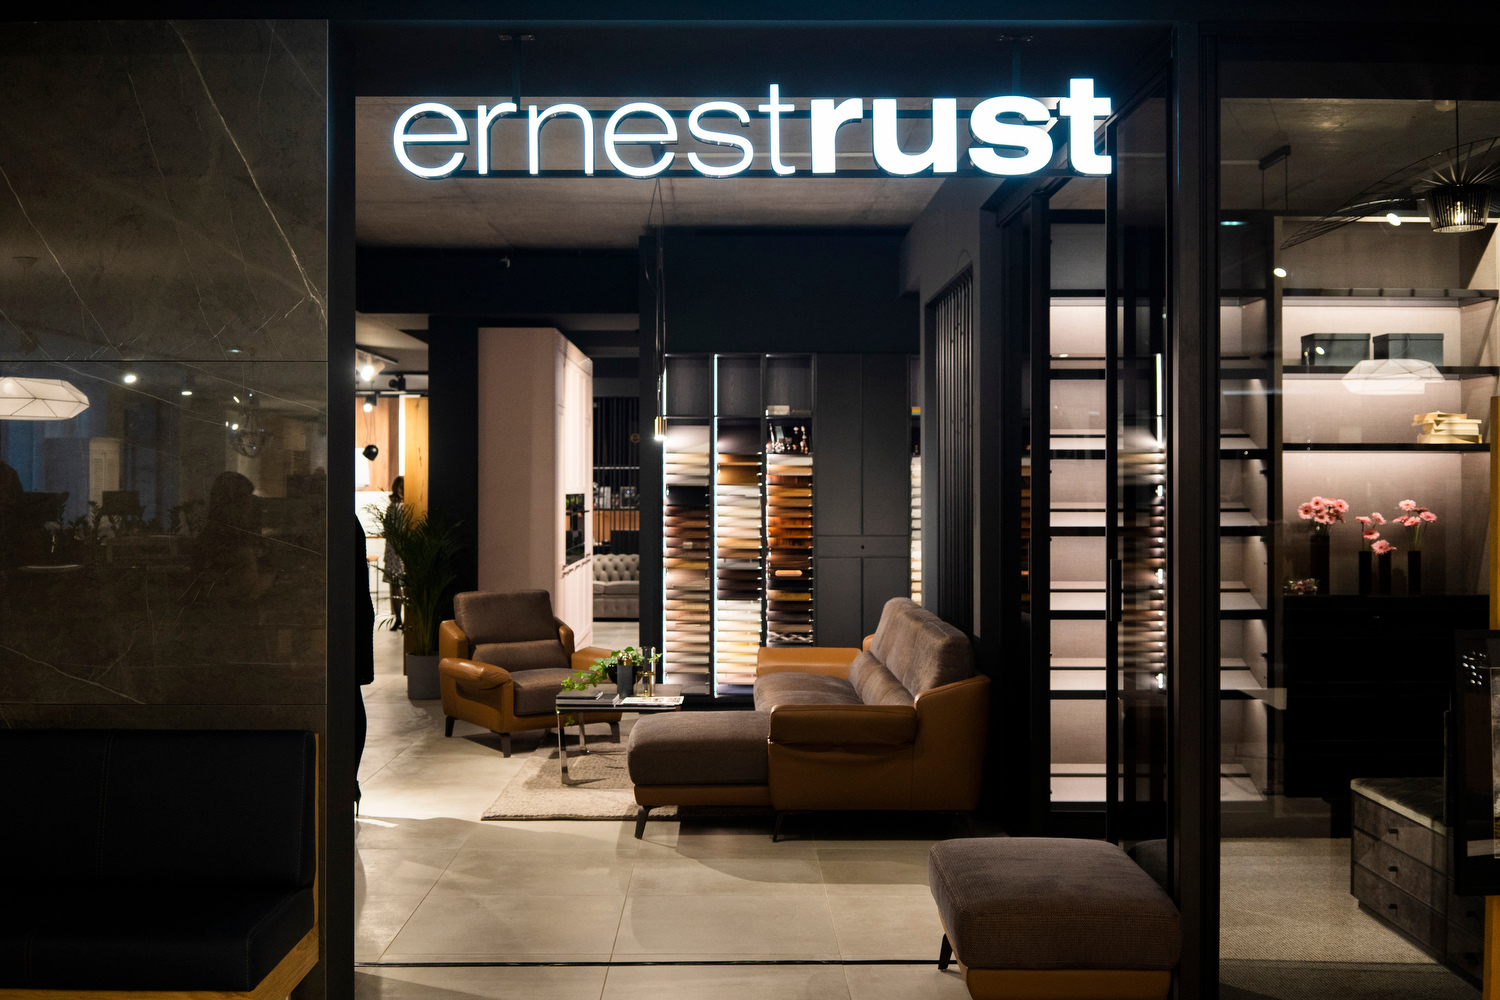 On April 4th in Kraków we celebrated the grand opening of the new ernestrust® showroom at Galeria Tetmajera 83.